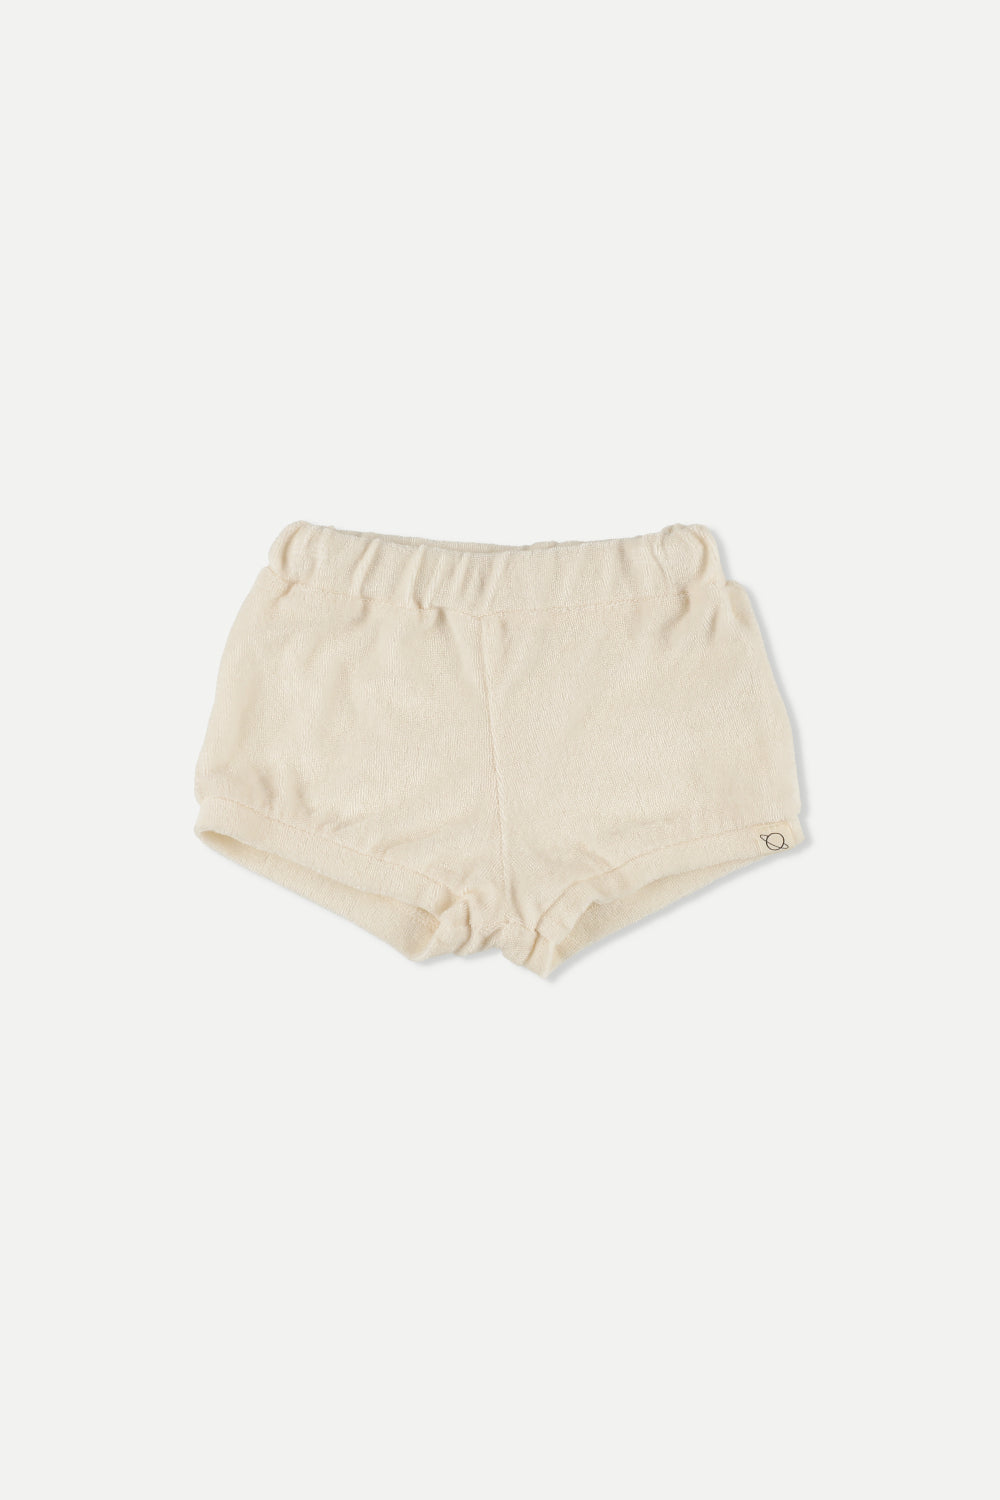 My little cozmo - conrad281 - terry shorts - ivory